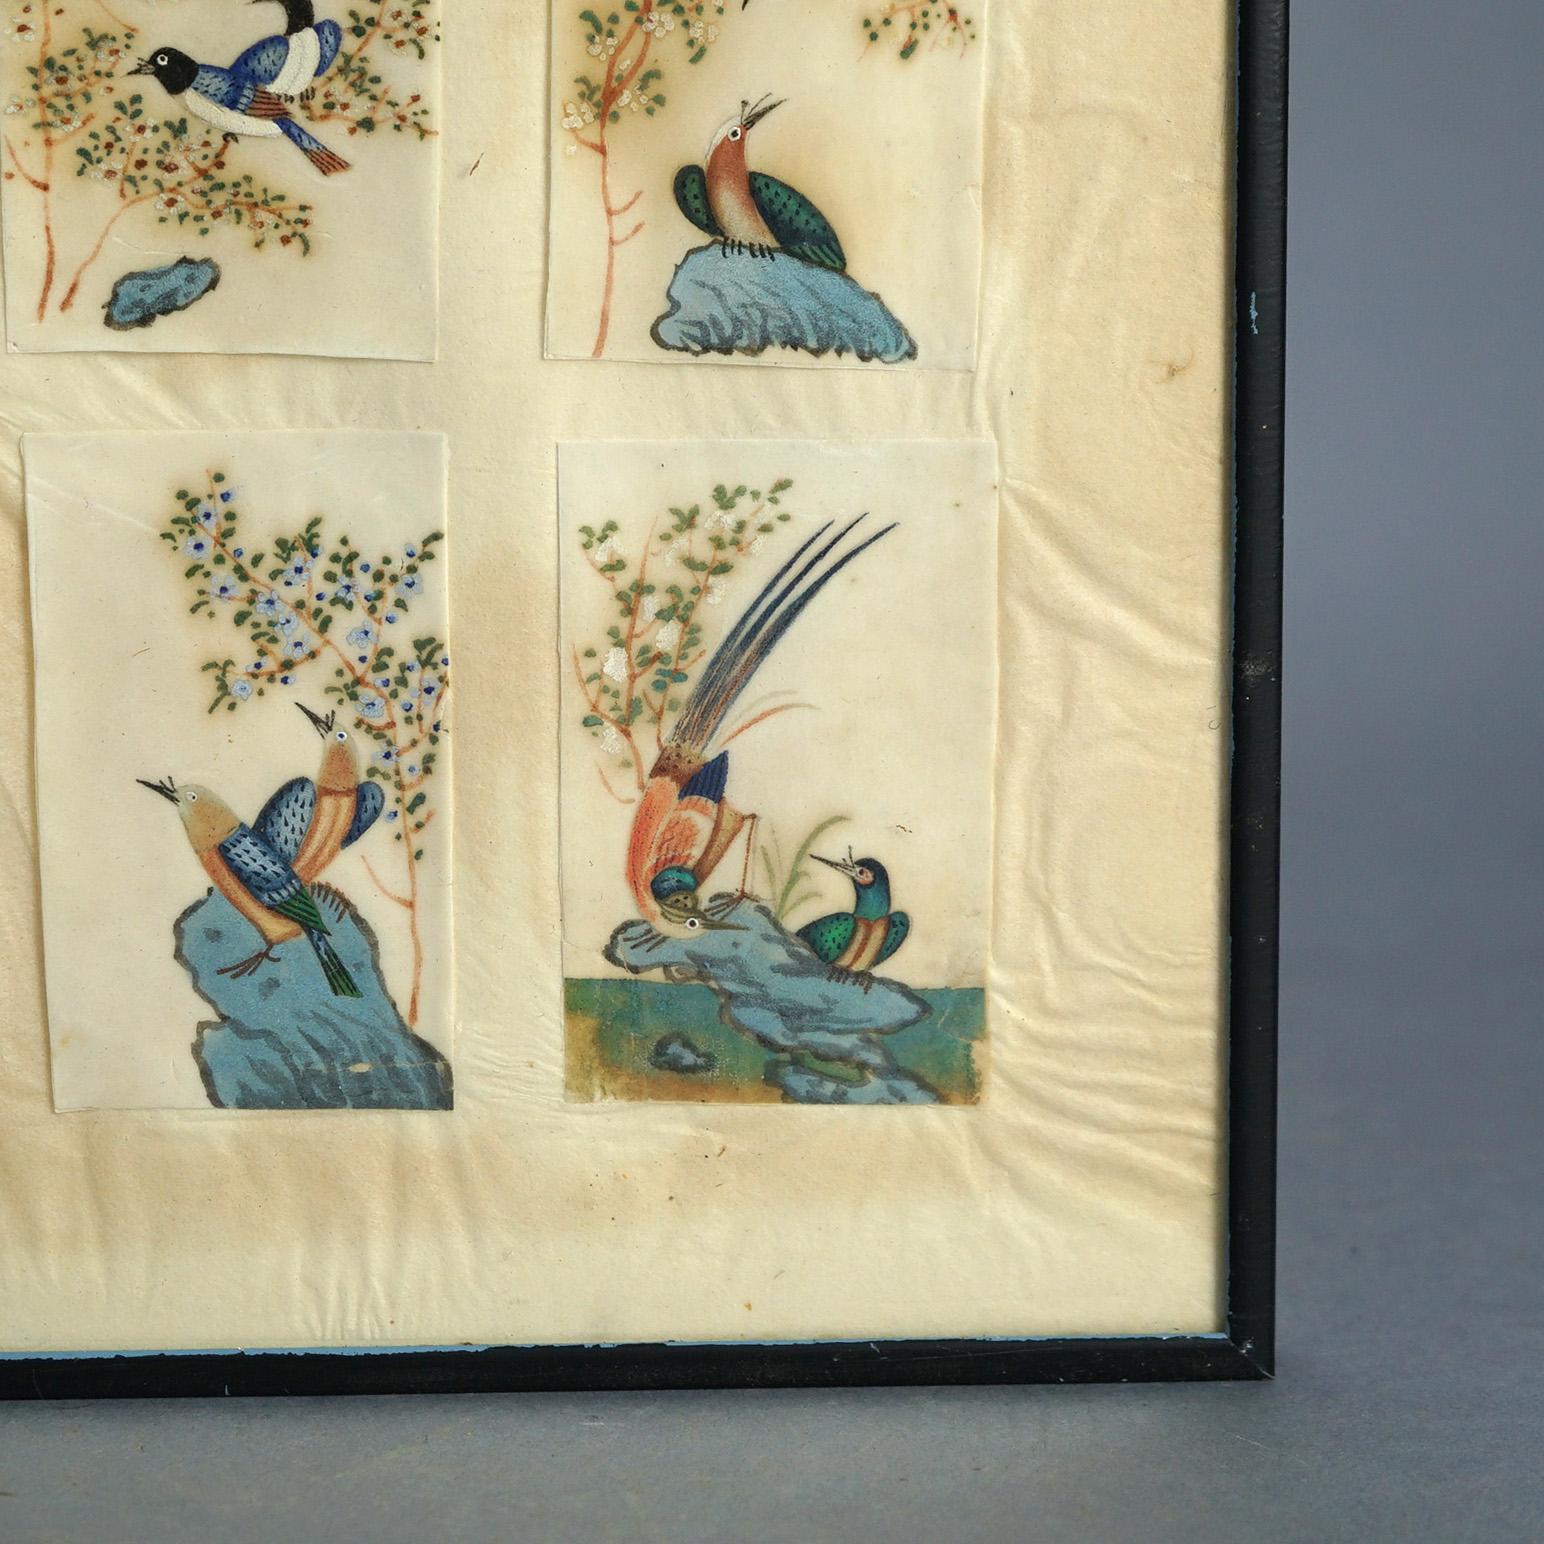 Antique Chinese Bird Study Watercolor Paintings on Paper C1920

Measures - 15.25